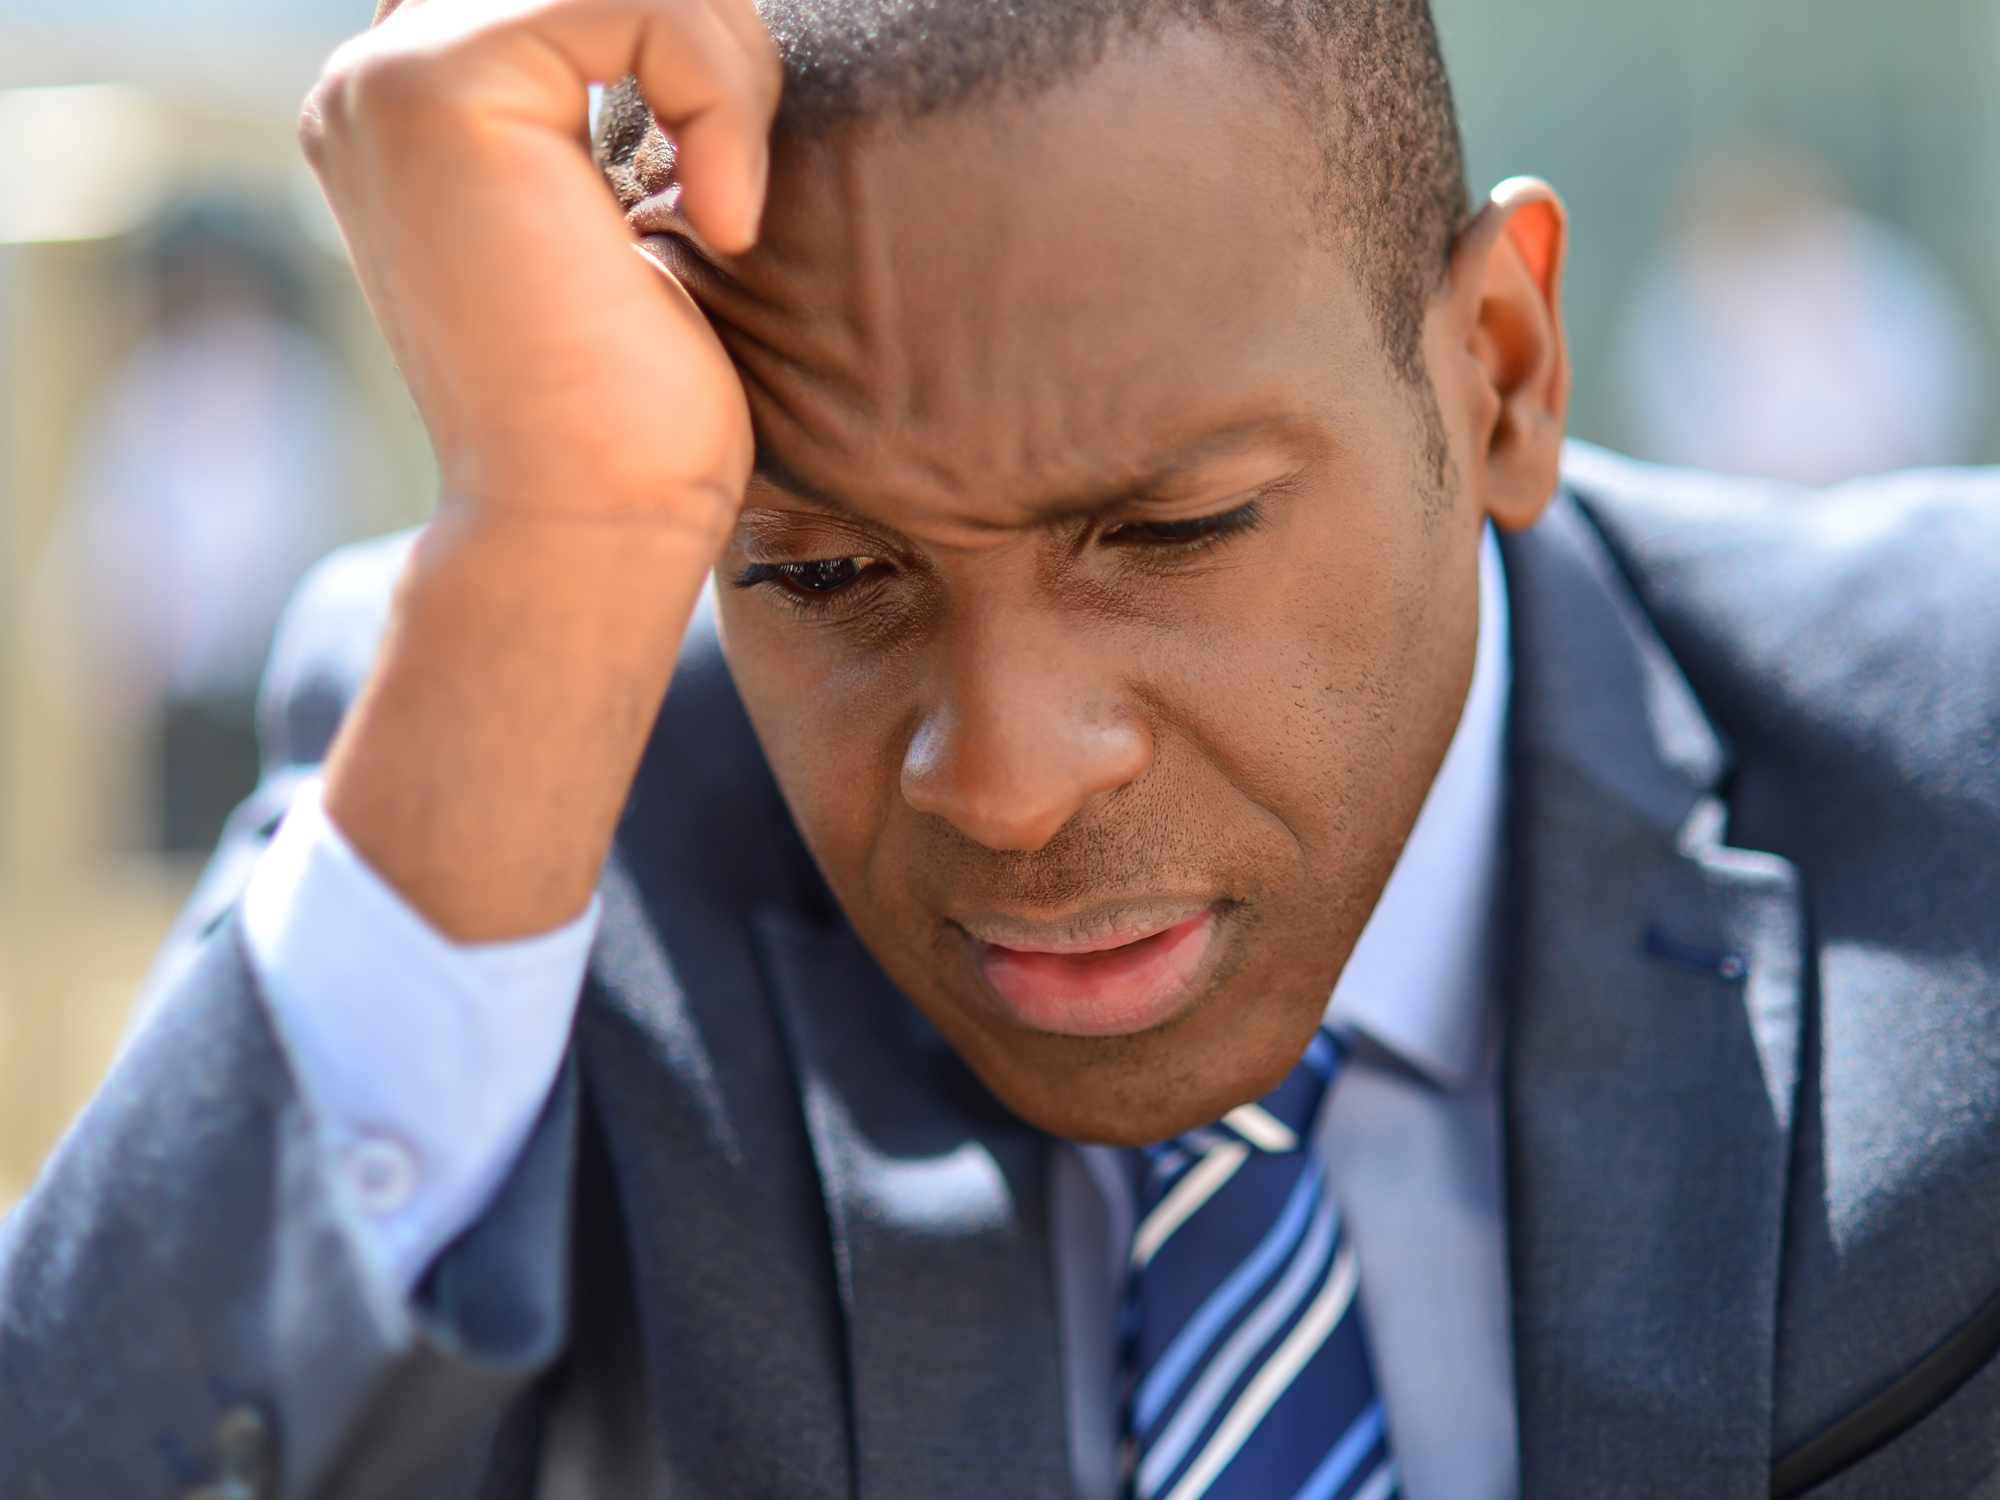 Why is anxiety giving men cancer? - Easy Health Options®